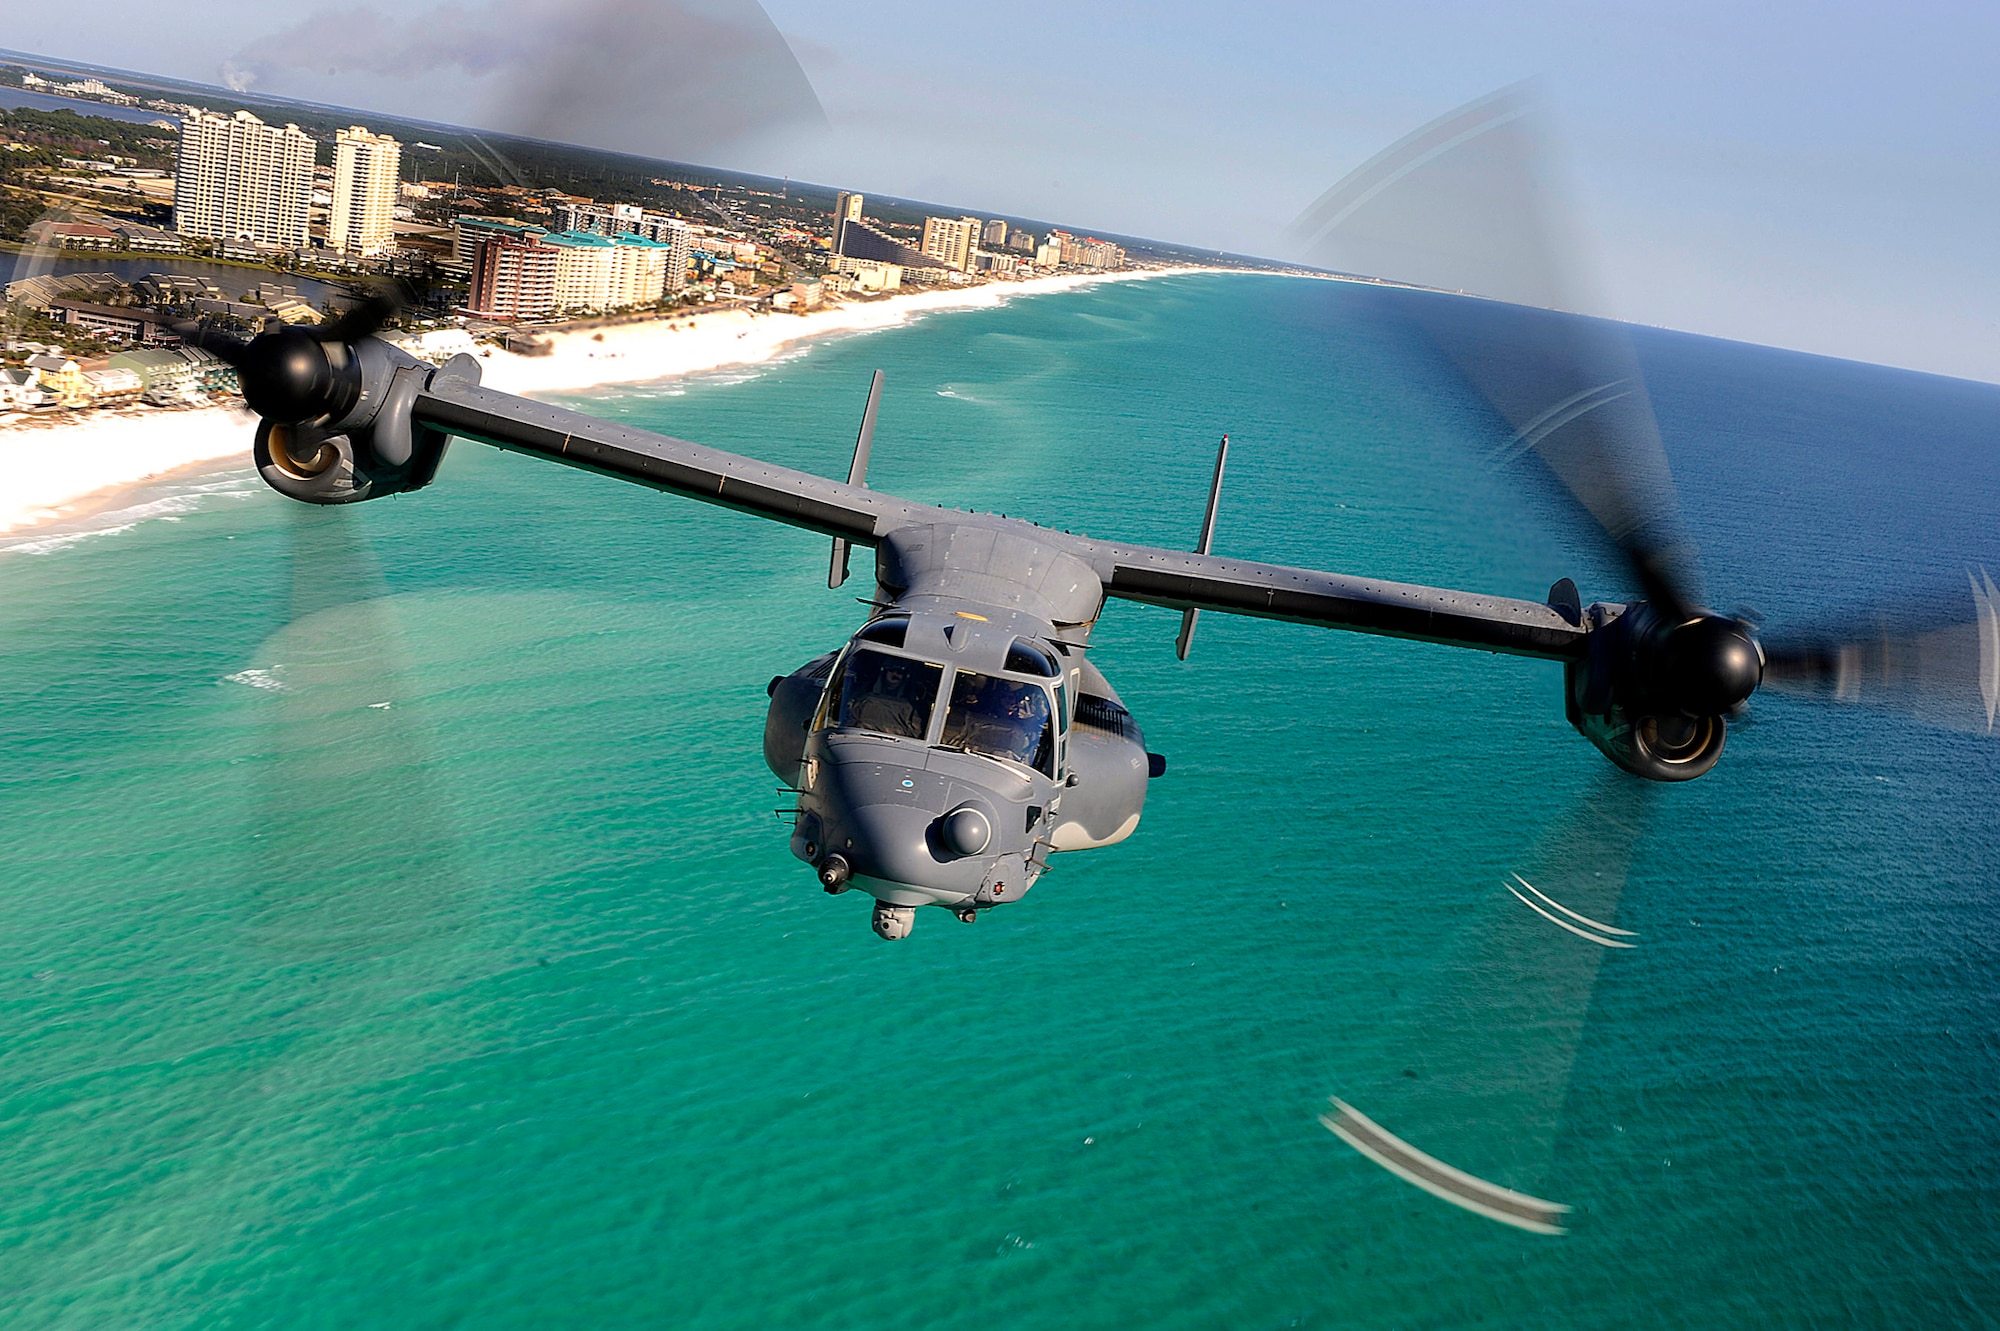 A CV-22 Osprey aircraft from the 8th Special Operations Squadron at Hurlburt Field, Fla., flies Jan. 31, 2009, over Florida's Emerald Coast. While over the water, the crew practiced using a hoist, which is used to rescue stranded people. (U.S. Air Force photo/Senior Airman Julianne Showalter)